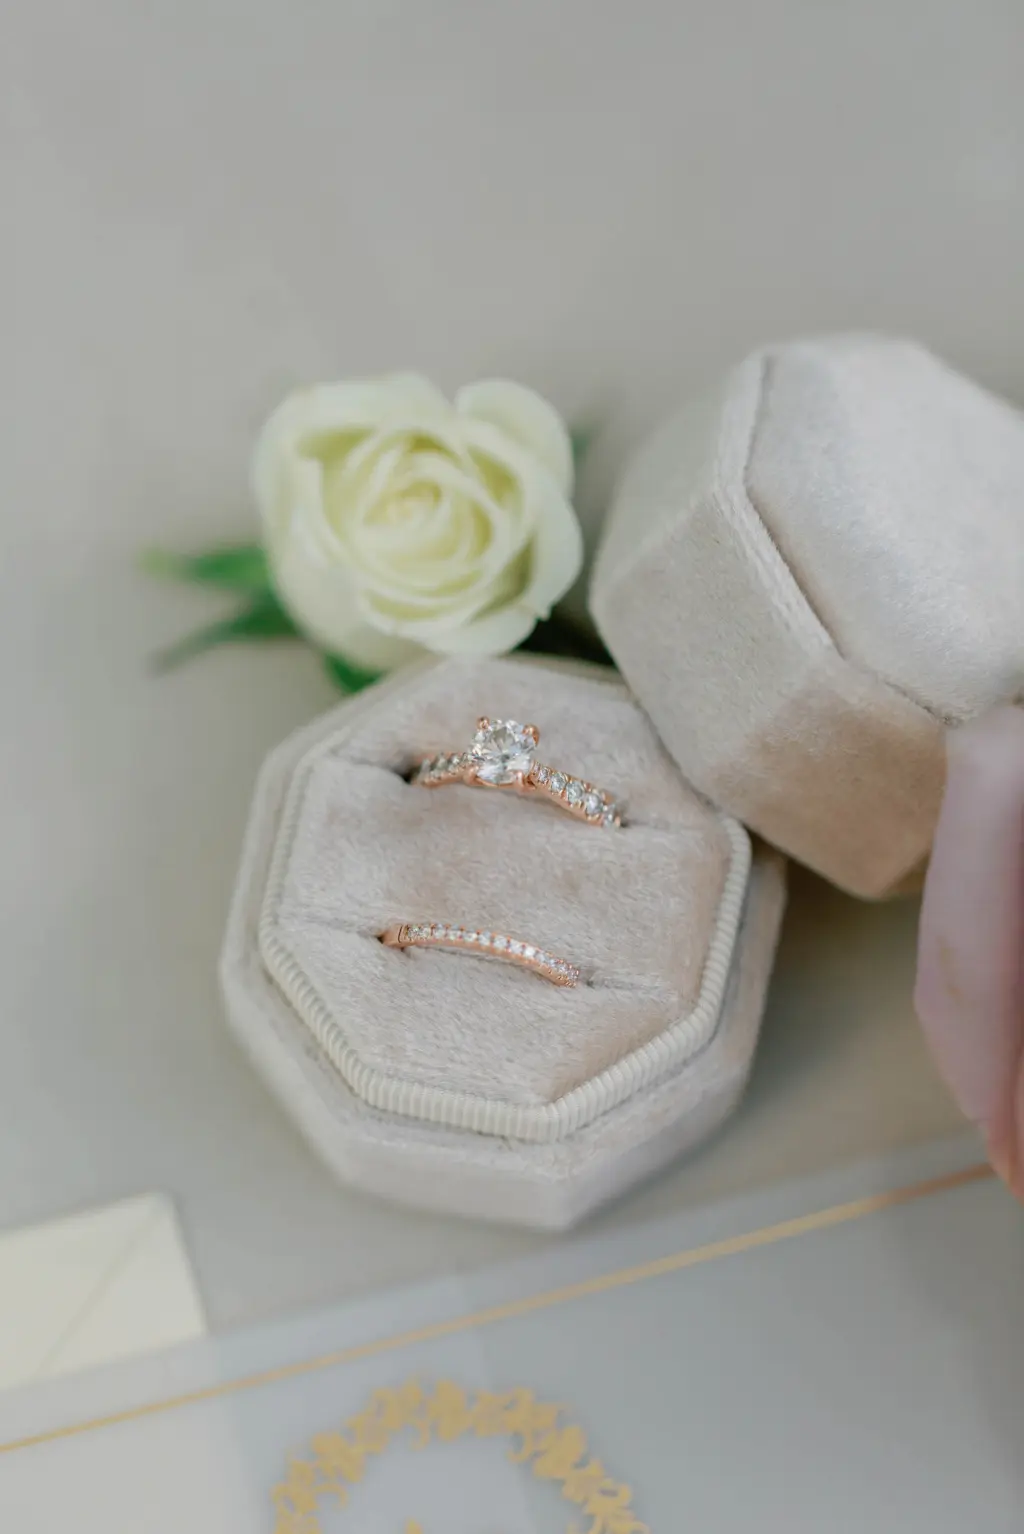 Rose Gold Wedding Band and Engagement Ring with Solitaire Oval Inspiration